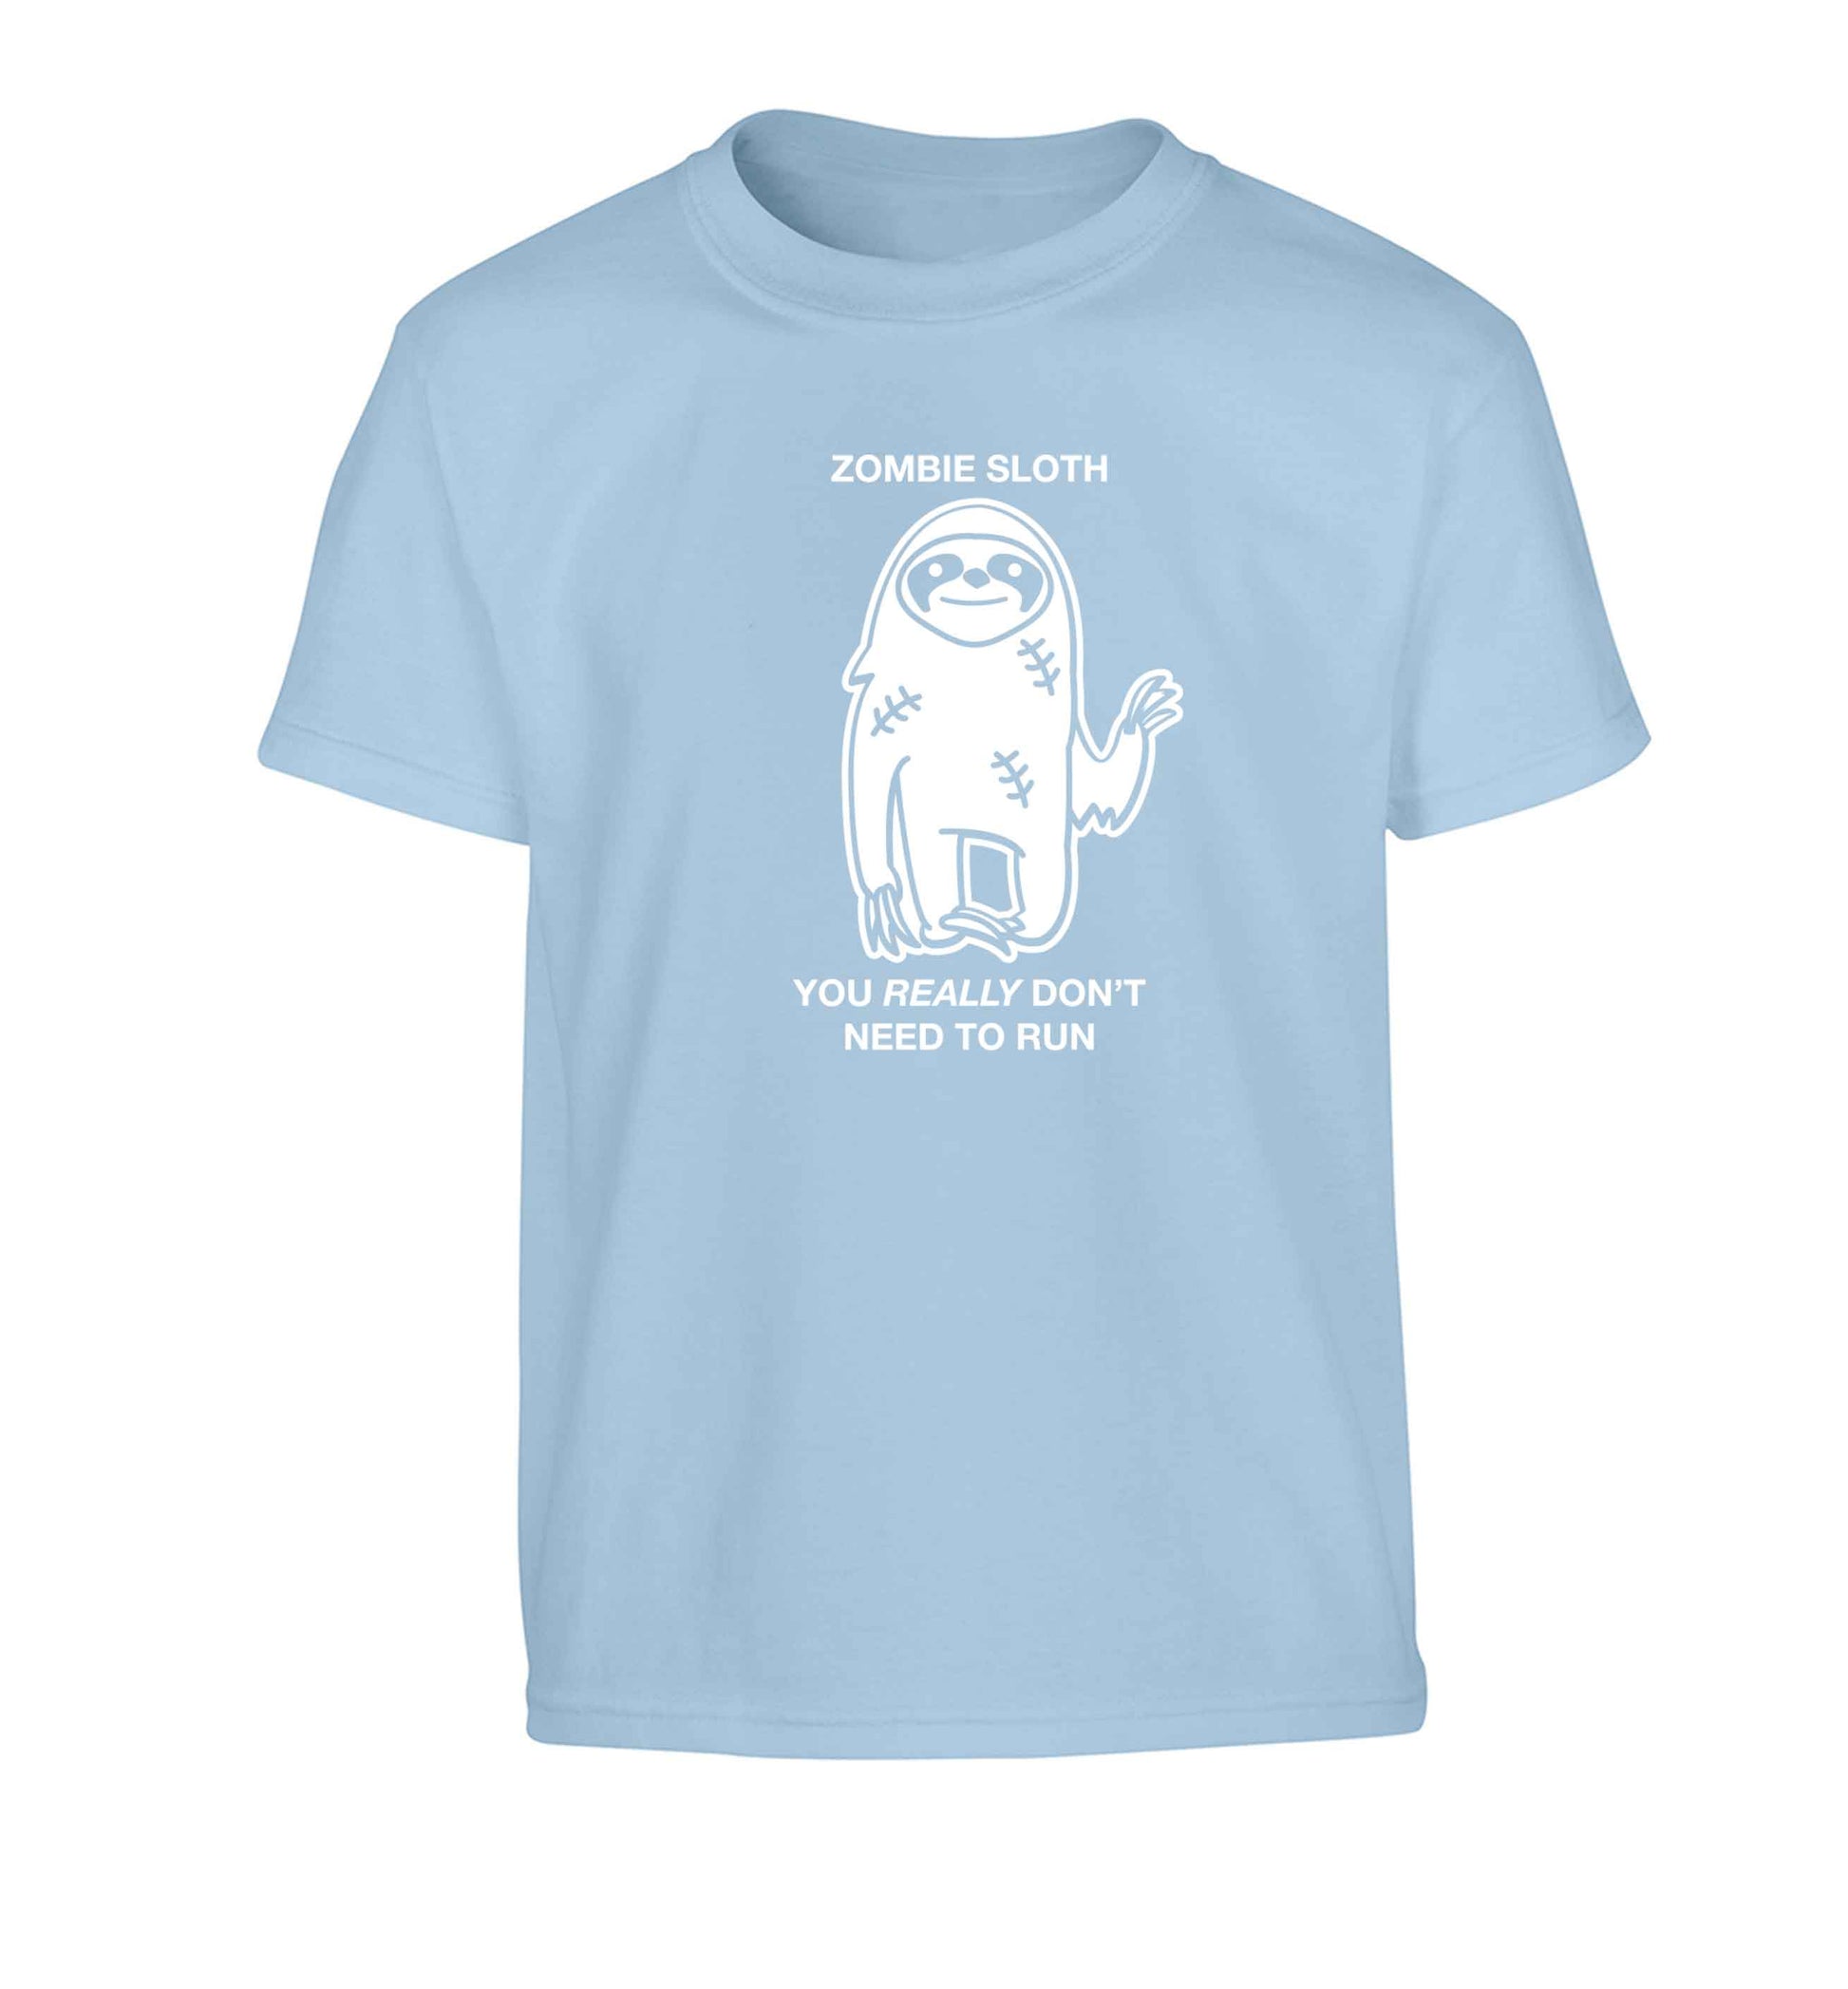 Zombie sloth you really don't need to run Children's light blue Tshirt 12-13 Years